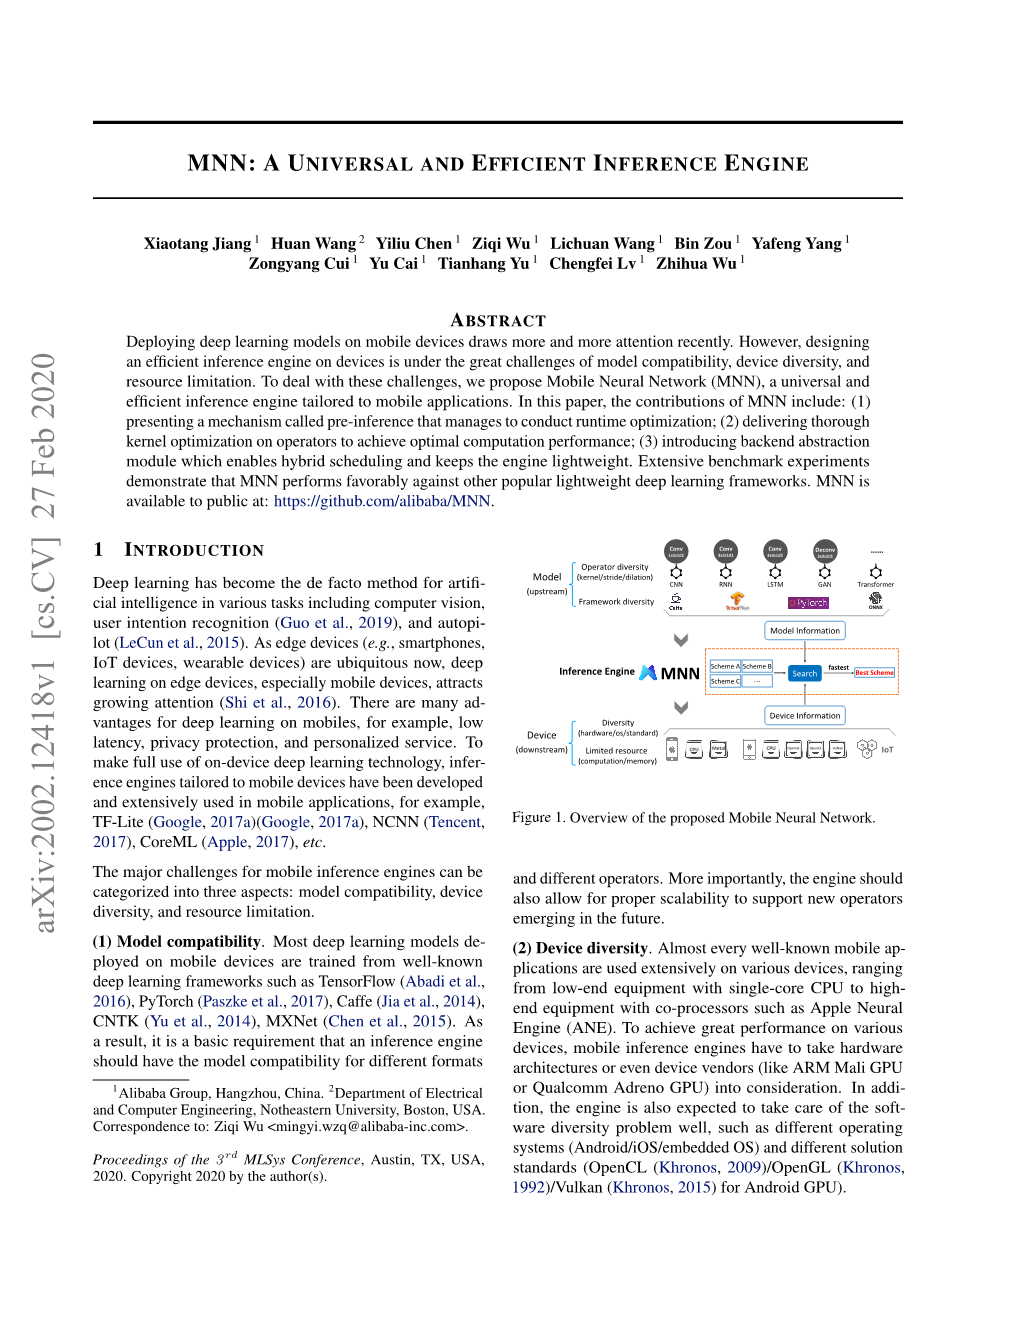 MNN: a Universal and Efficient Inference Engine